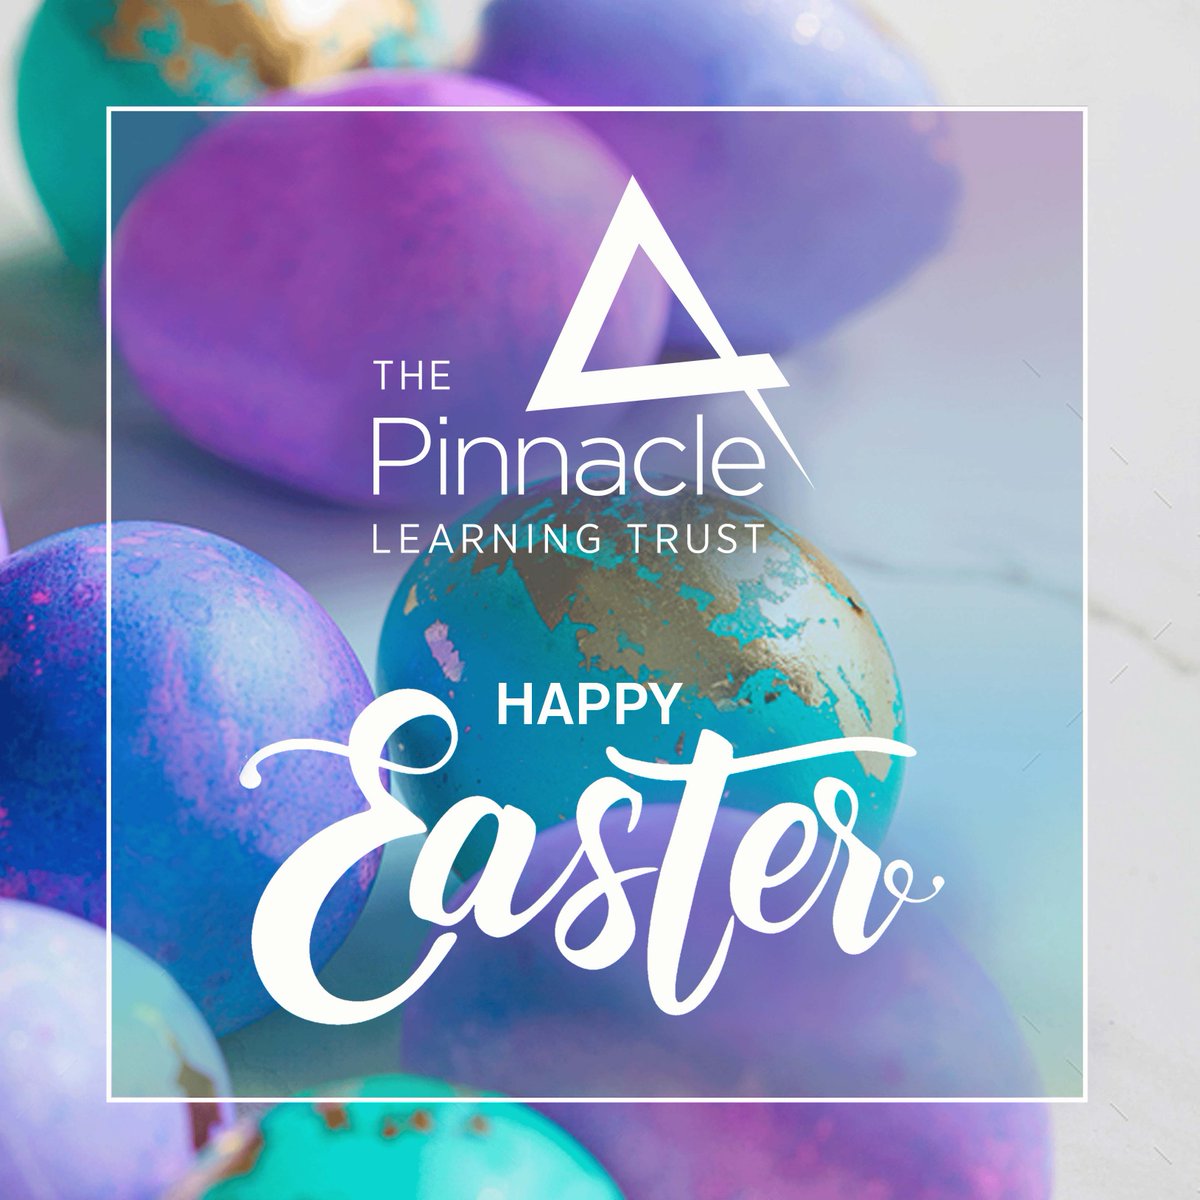 Happy Easter from everyone at The Pinnacle Learning Trust!